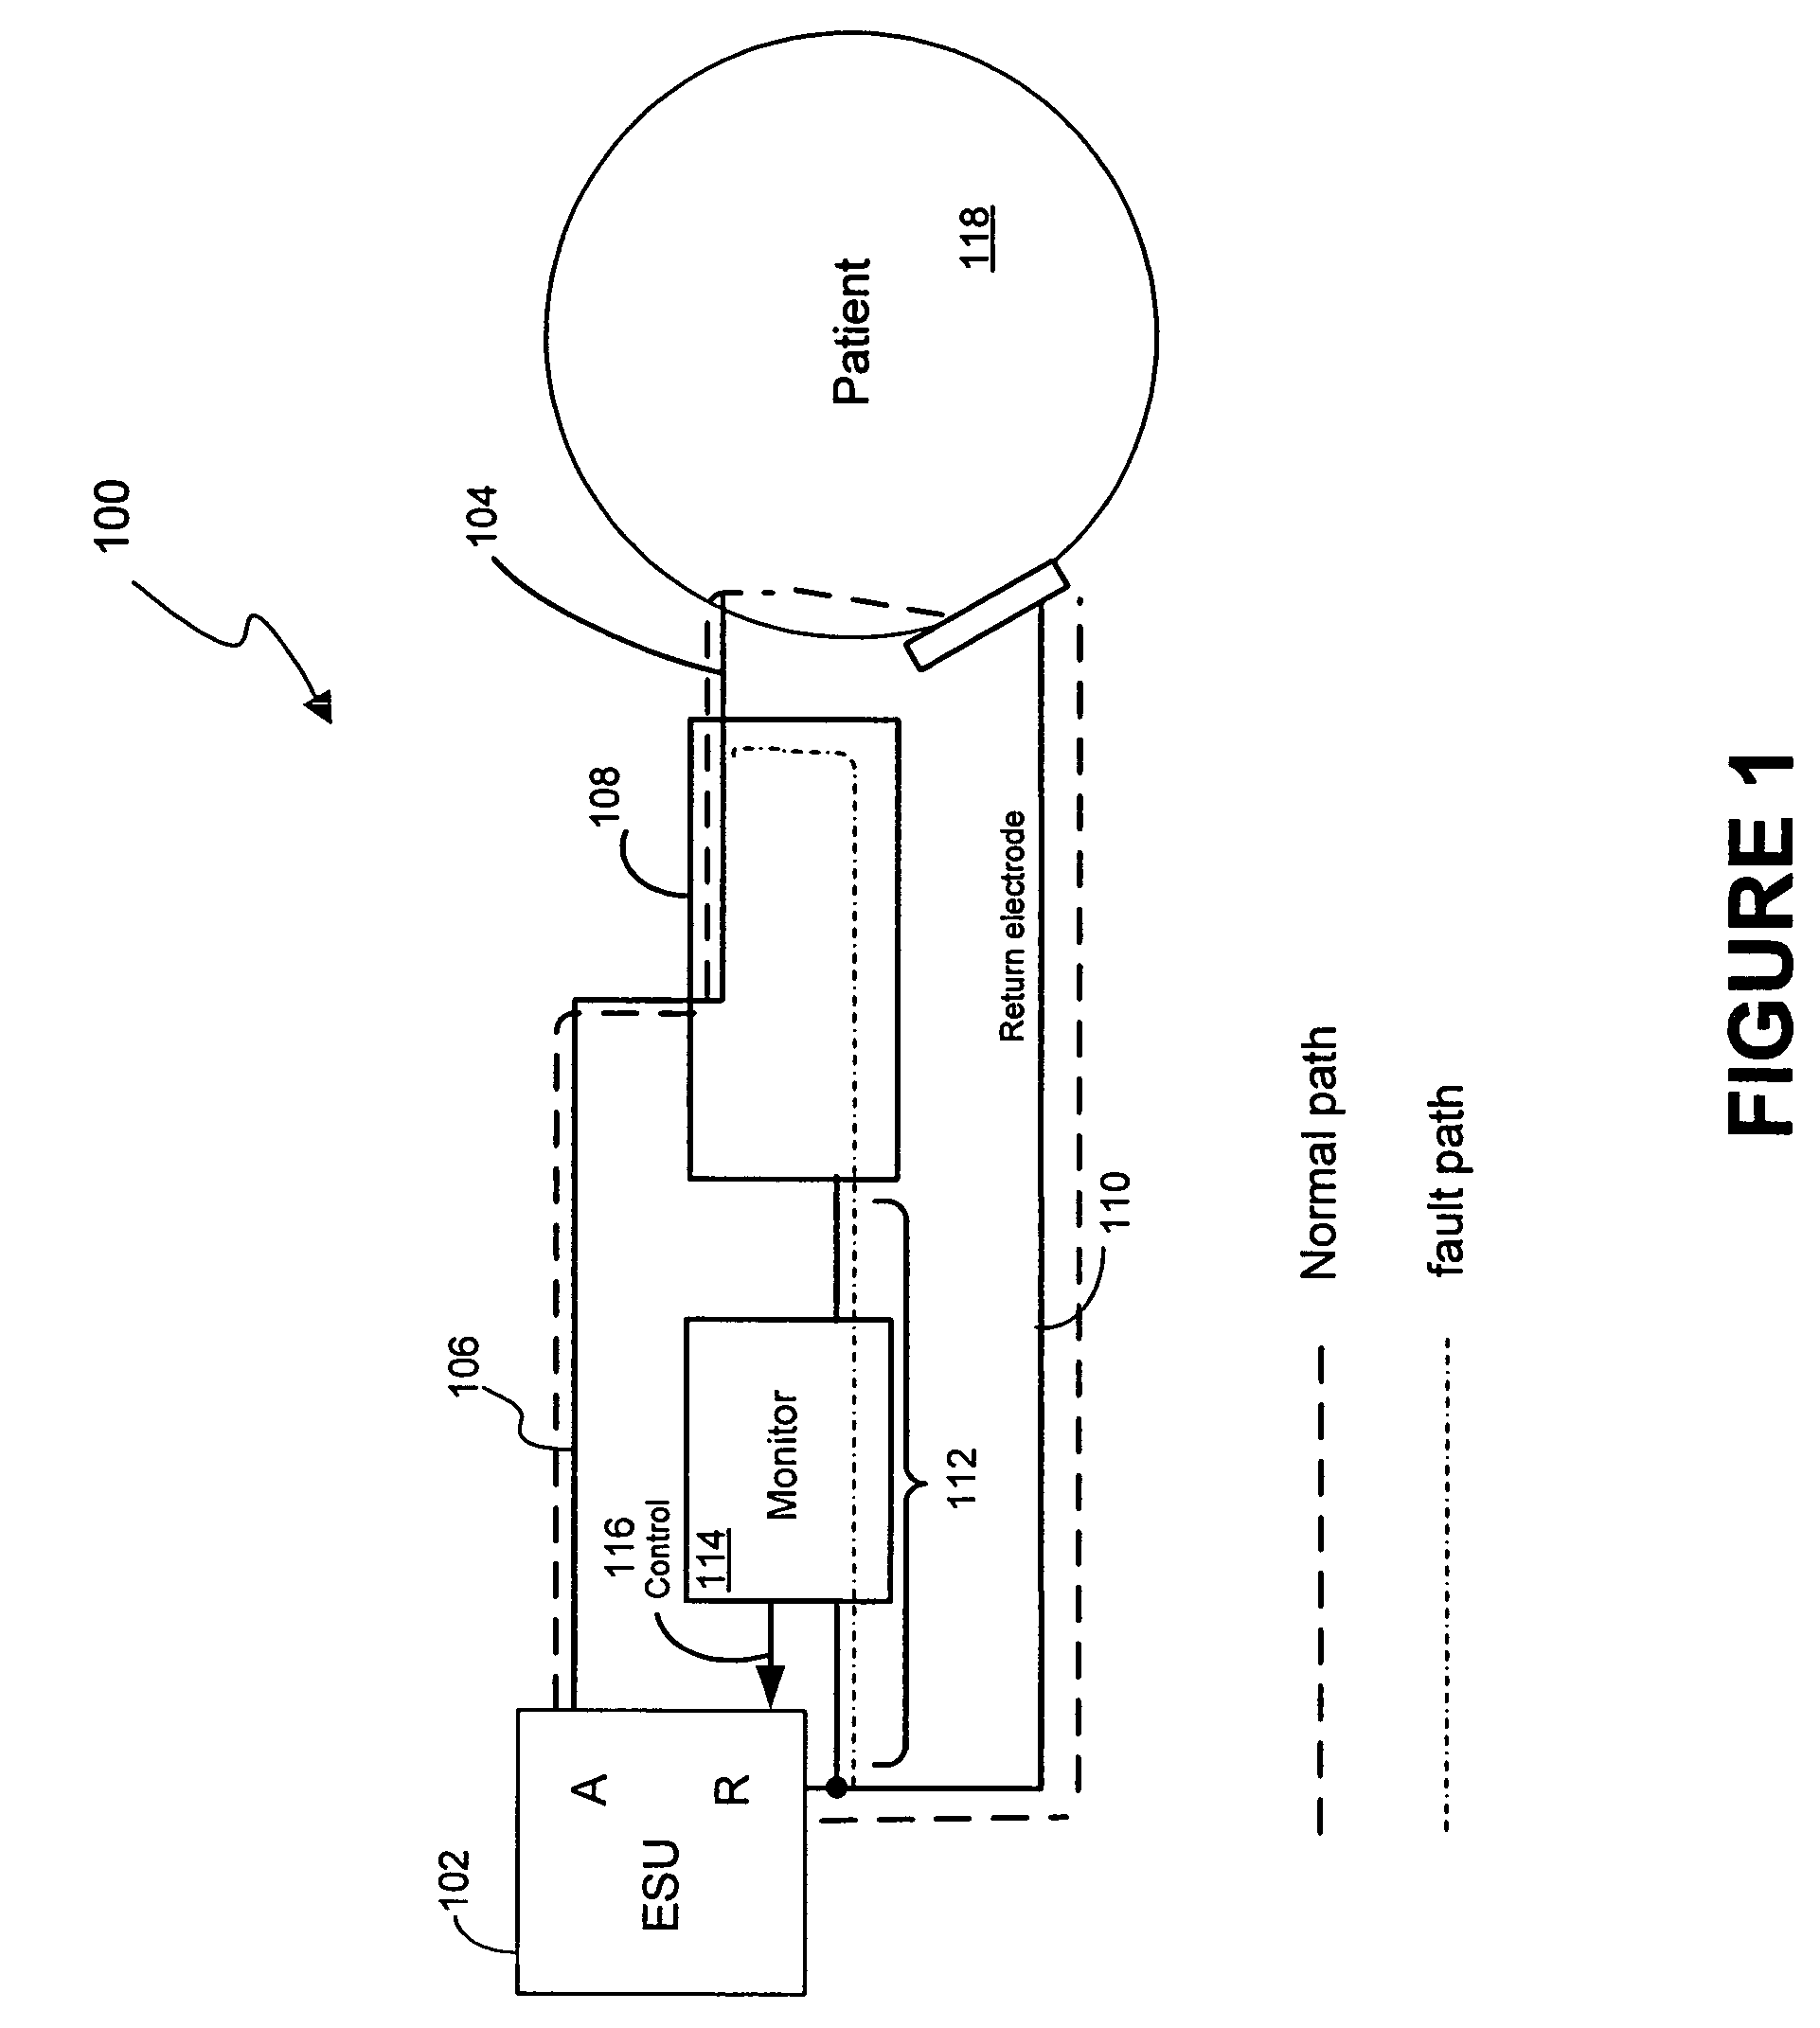 System and method for performing an electrosurgical procedure